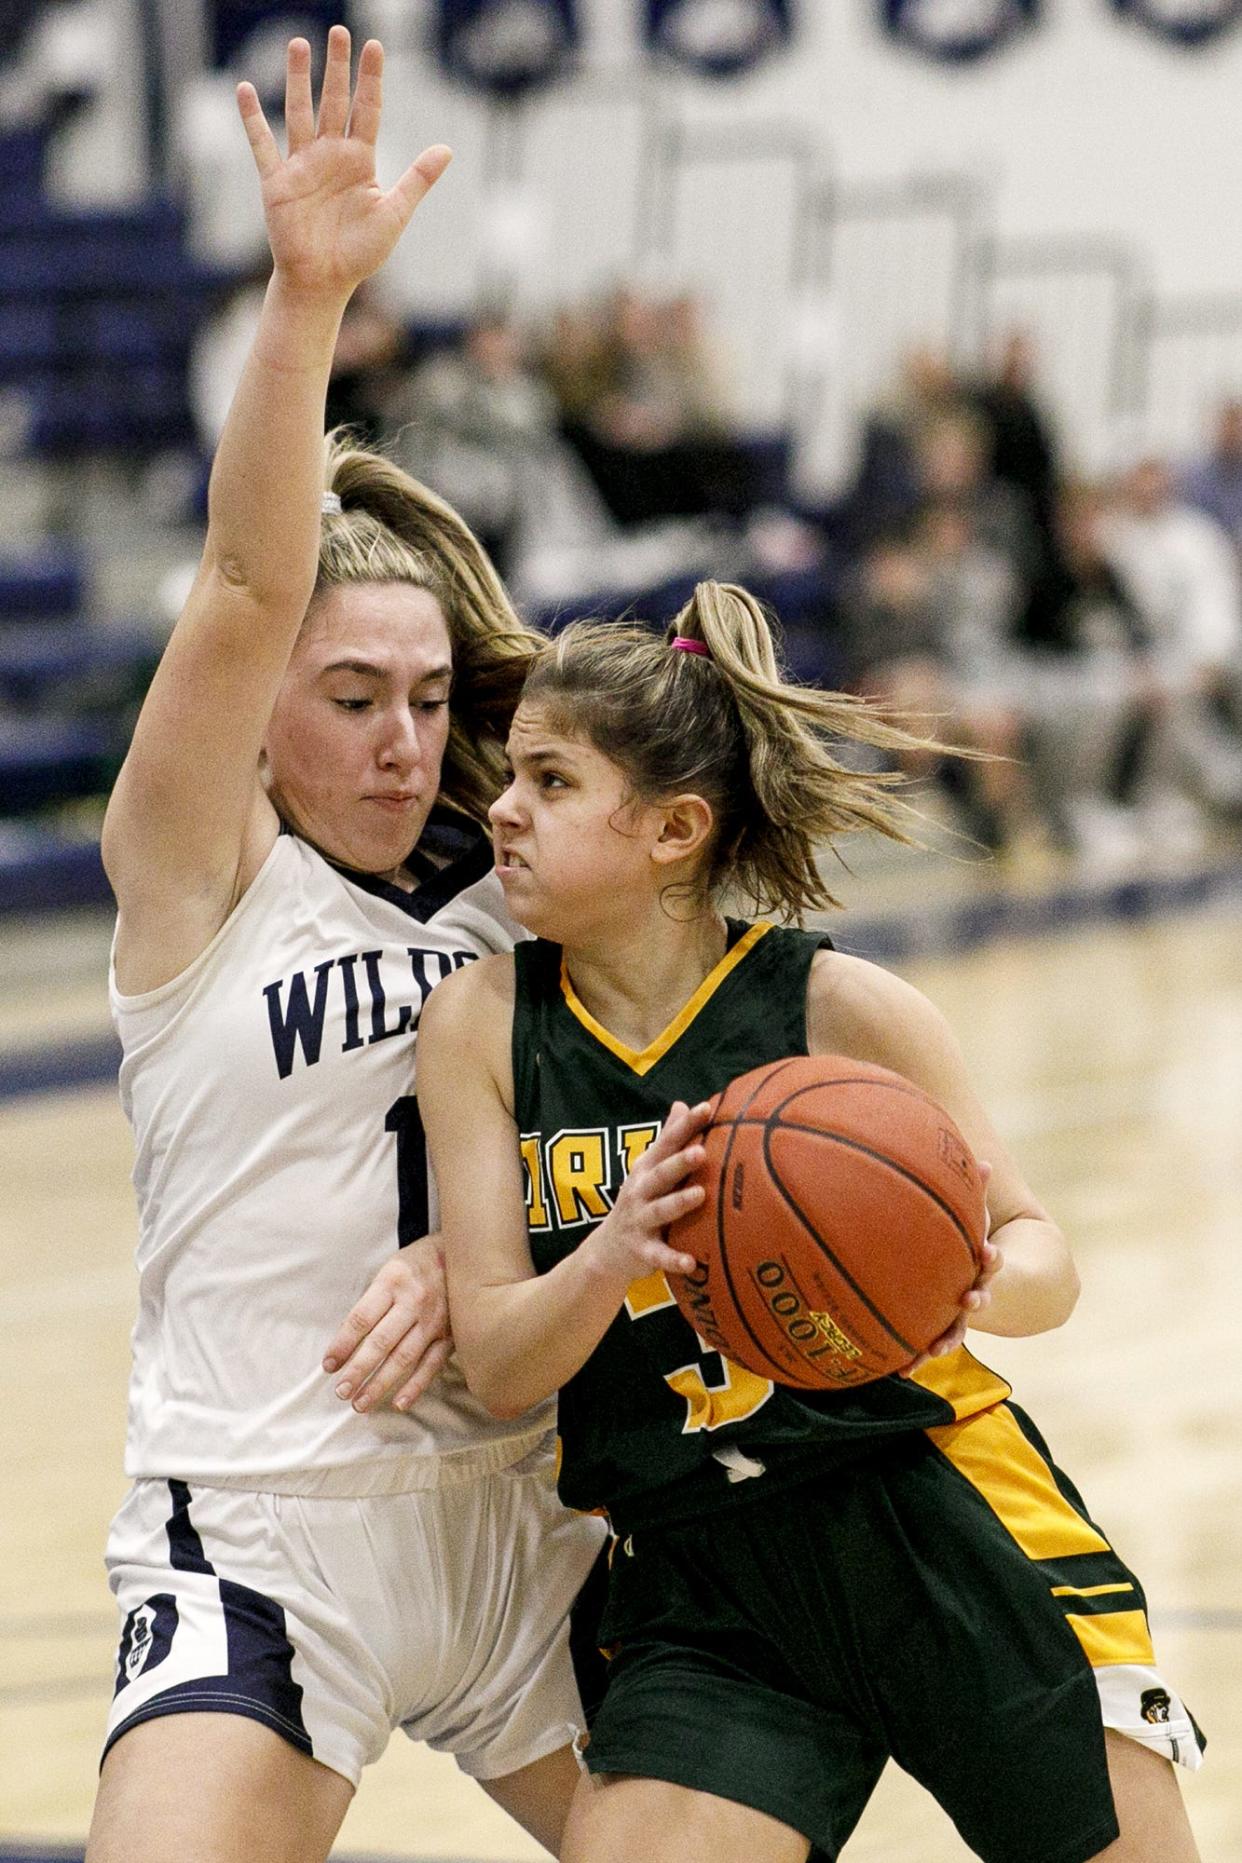 Dallastown's McKenna Kelley defends York Catholic's Mariah Shue. Dallastown defeats York Catholic 49-45 in the opening round of the YAIAA girls' basketball tournament at West York Area High School, Saturday, February 11, 2023.